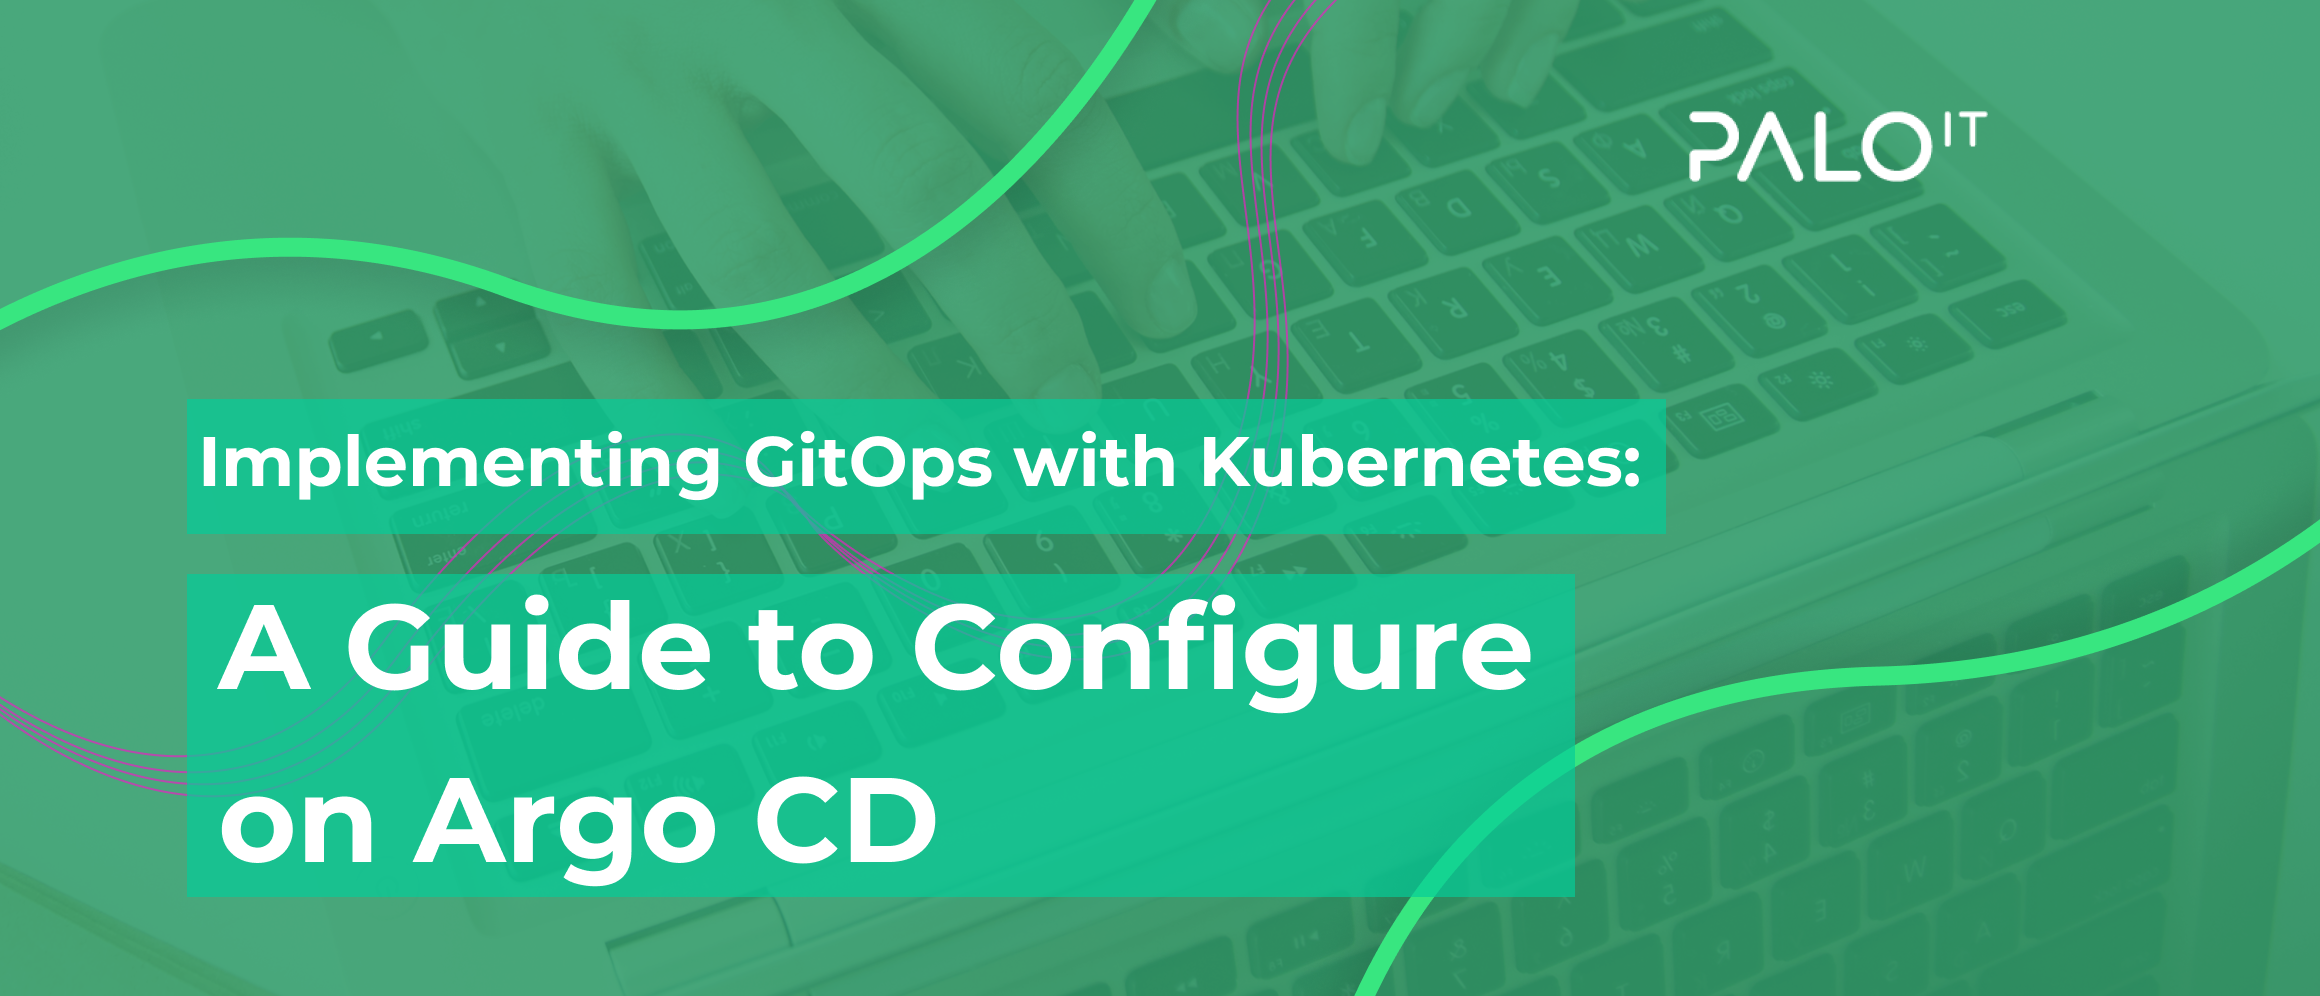 Implementing GitOps with Kubernetes: A Guide to Configure on Argo CD